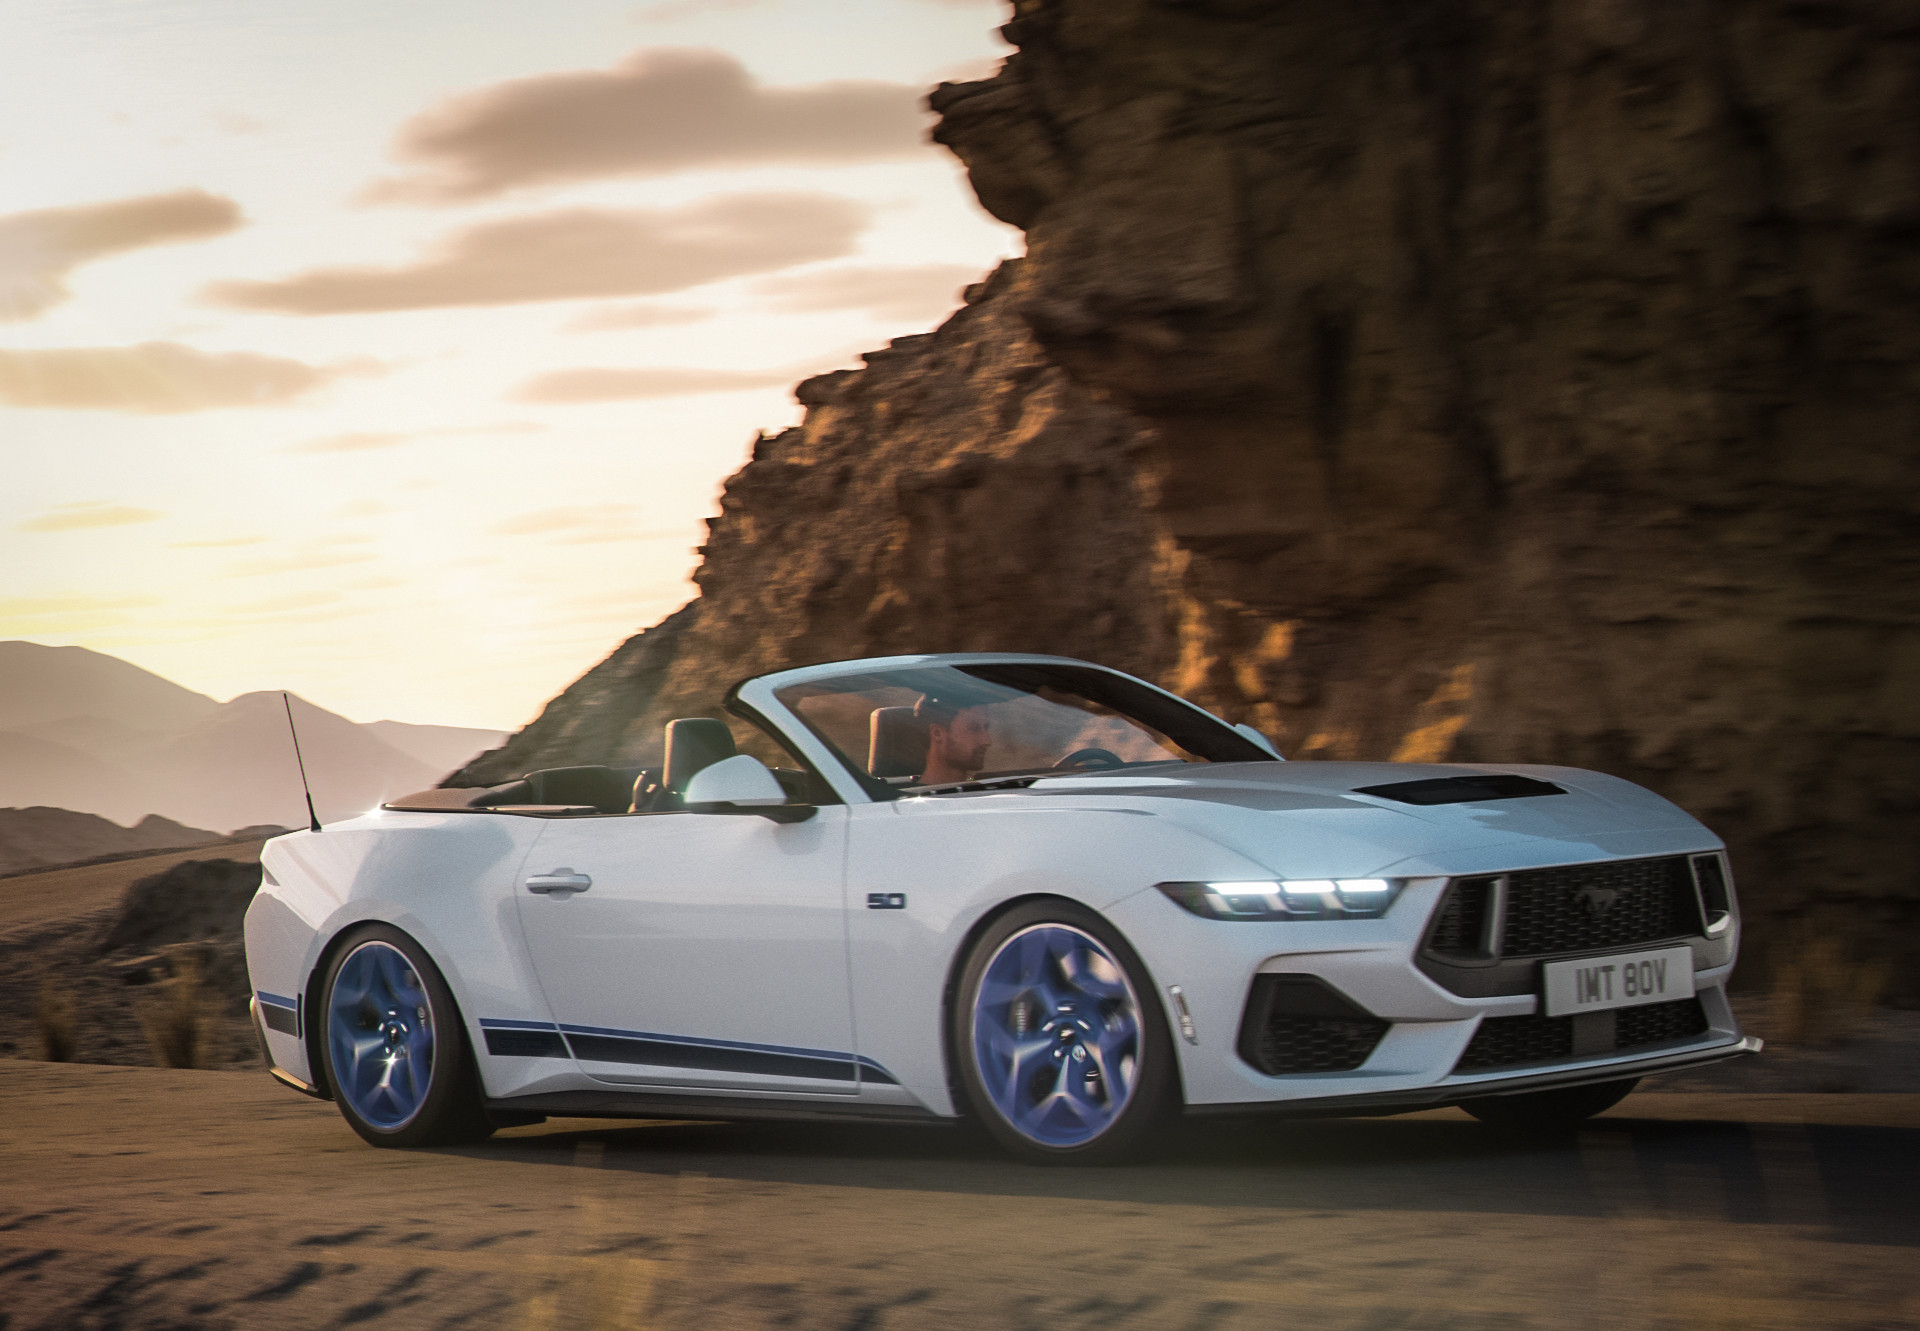 Ford celebrates the 60th anniversary of the iconic Mustang